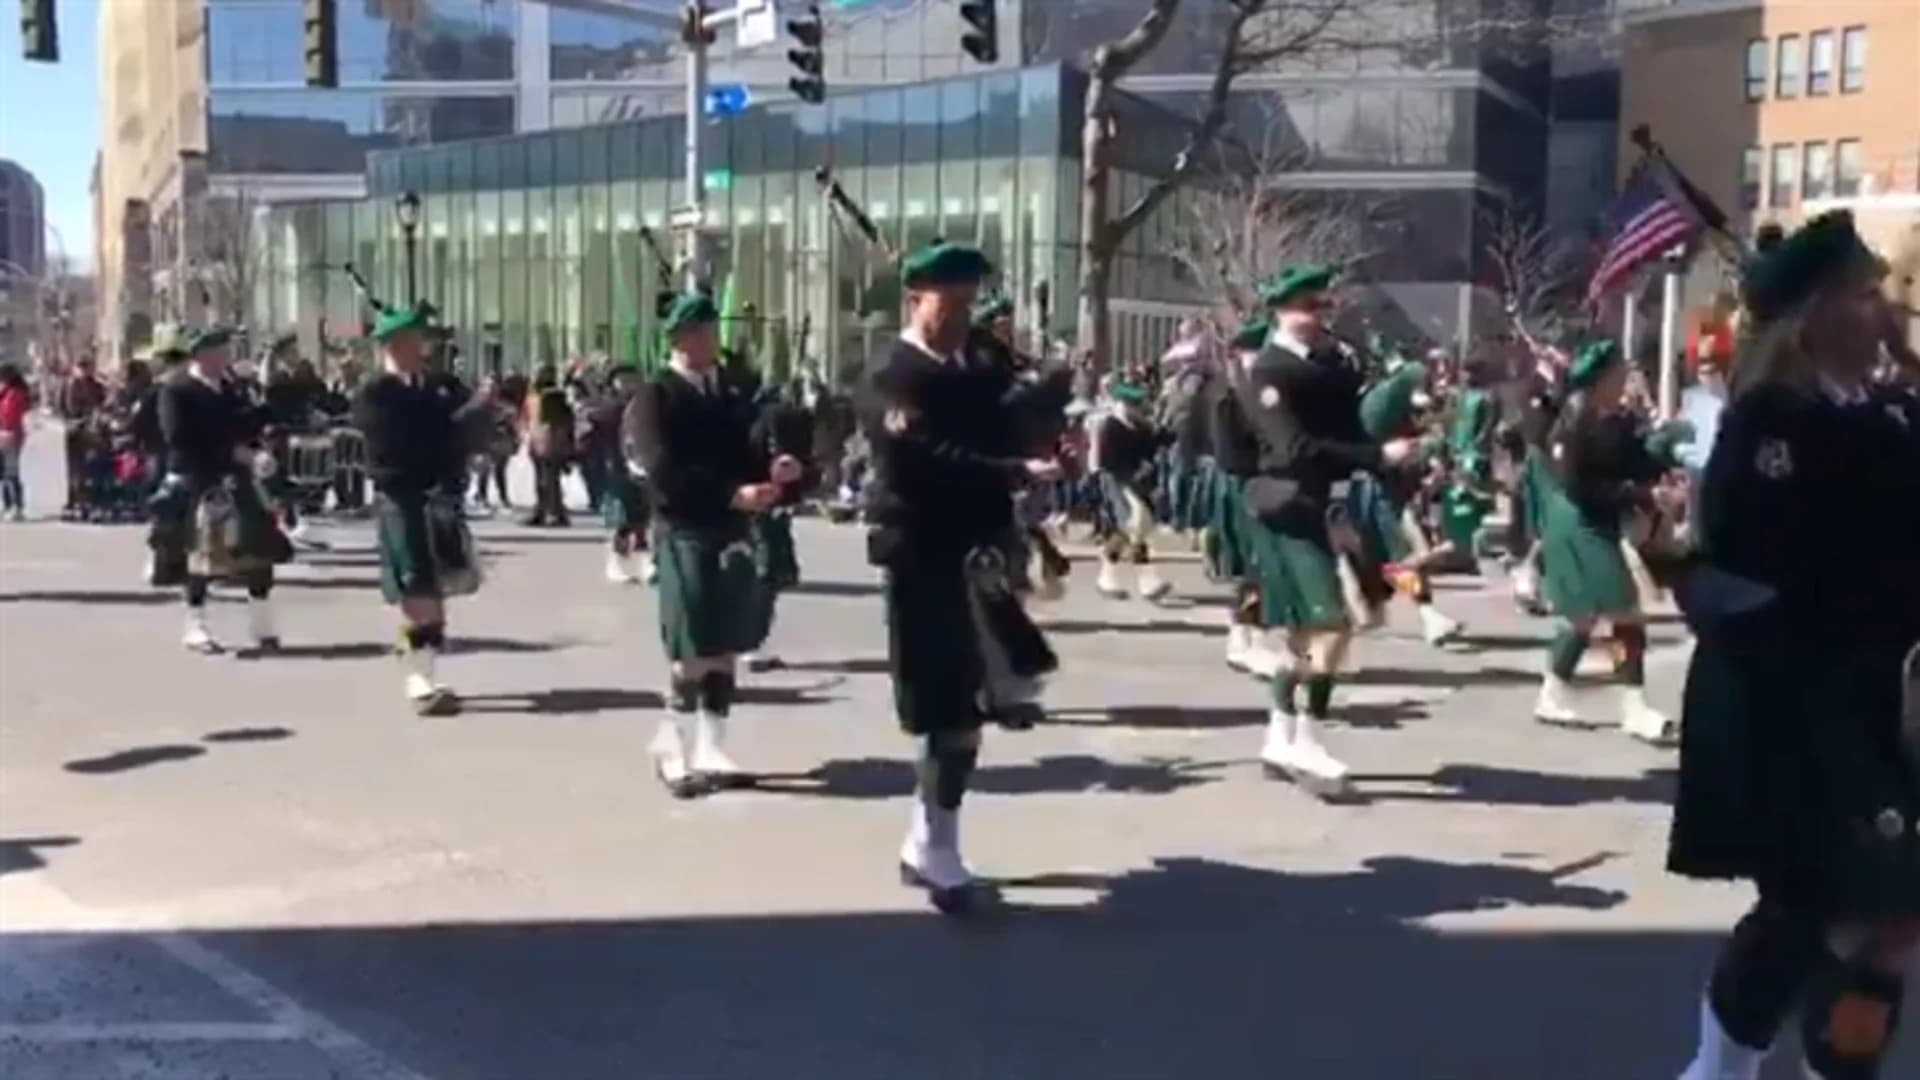 Your 2019 Hudson Valley St. Patrick's Day Photos